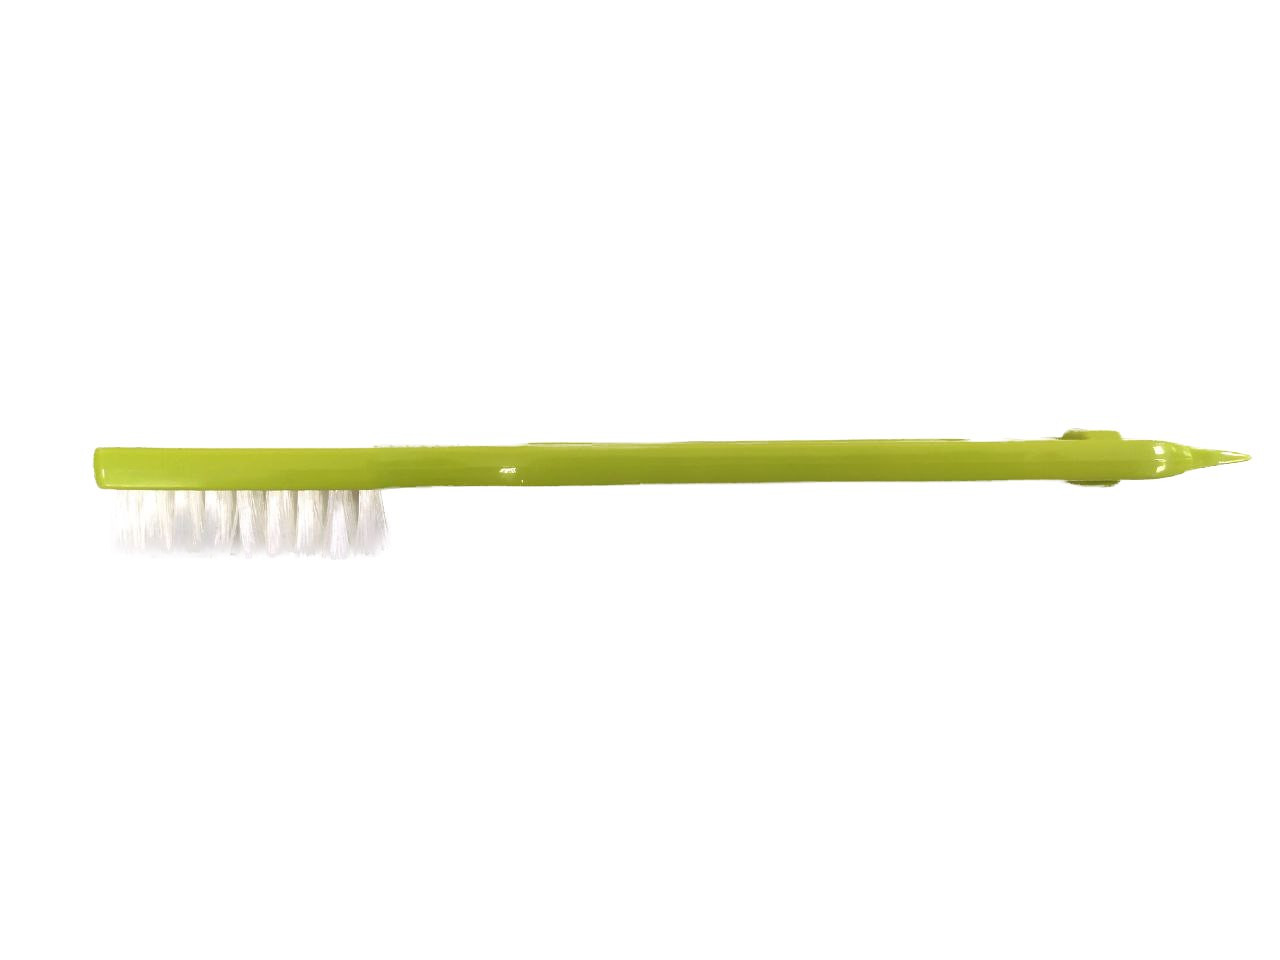 Spare part Omega Juicer MM900 and MM1500 - Cleaning Brush